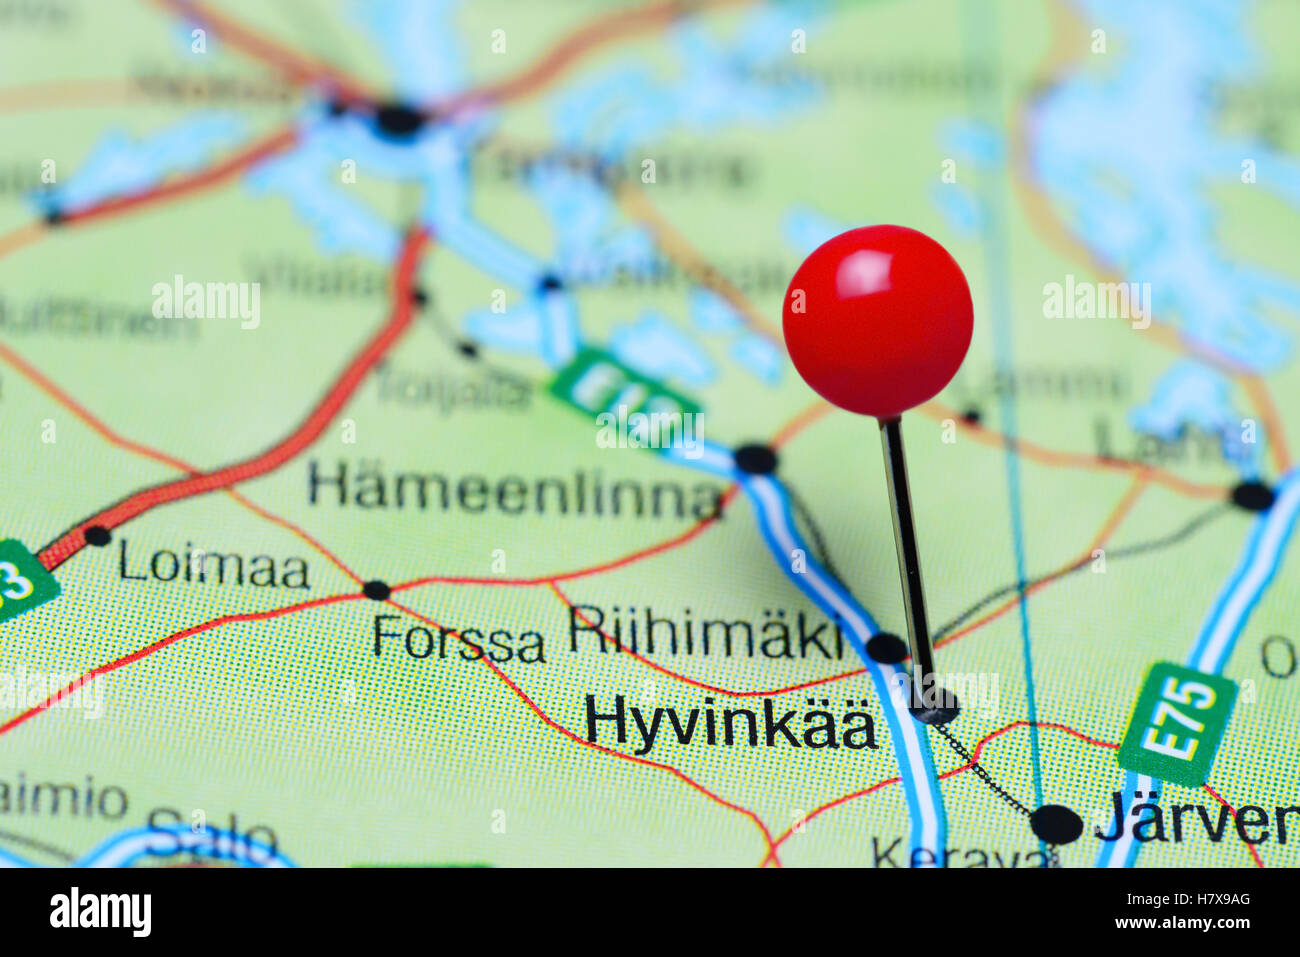 Hyvinkaa pinned on a map of Finland Stock Photo